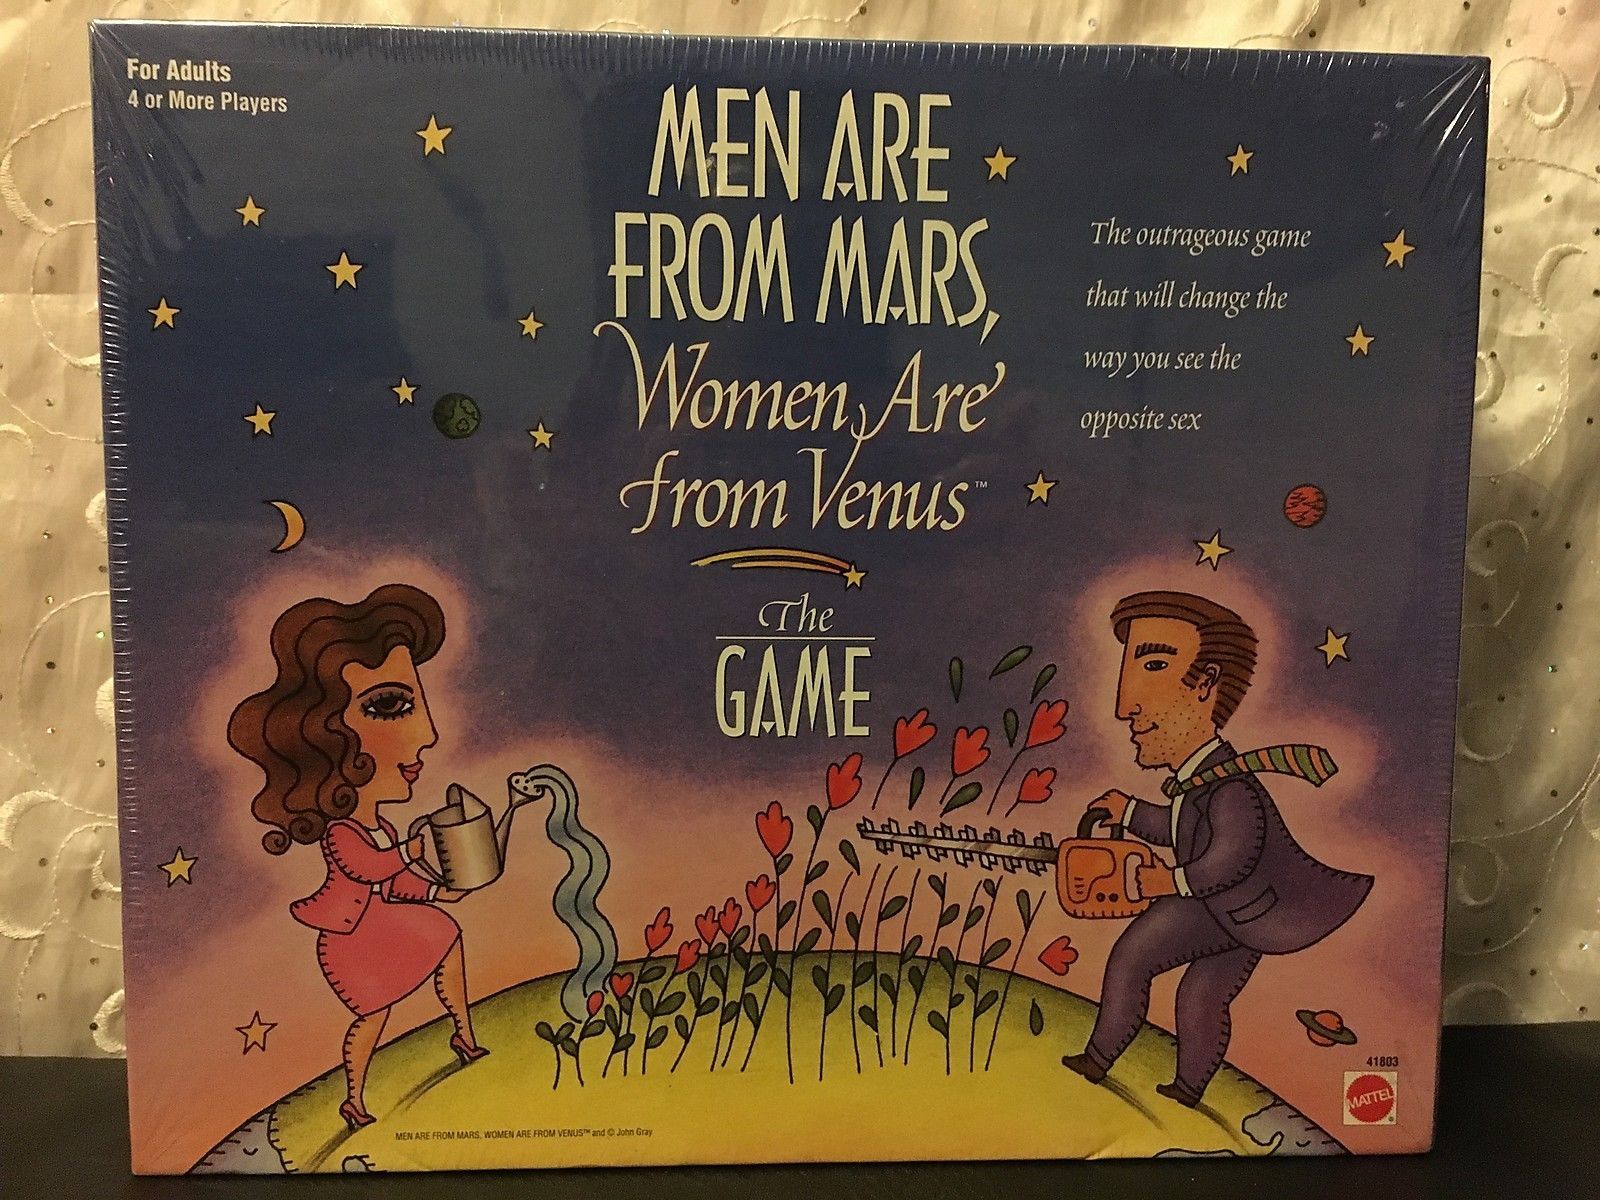 men are from mars women are from venus review